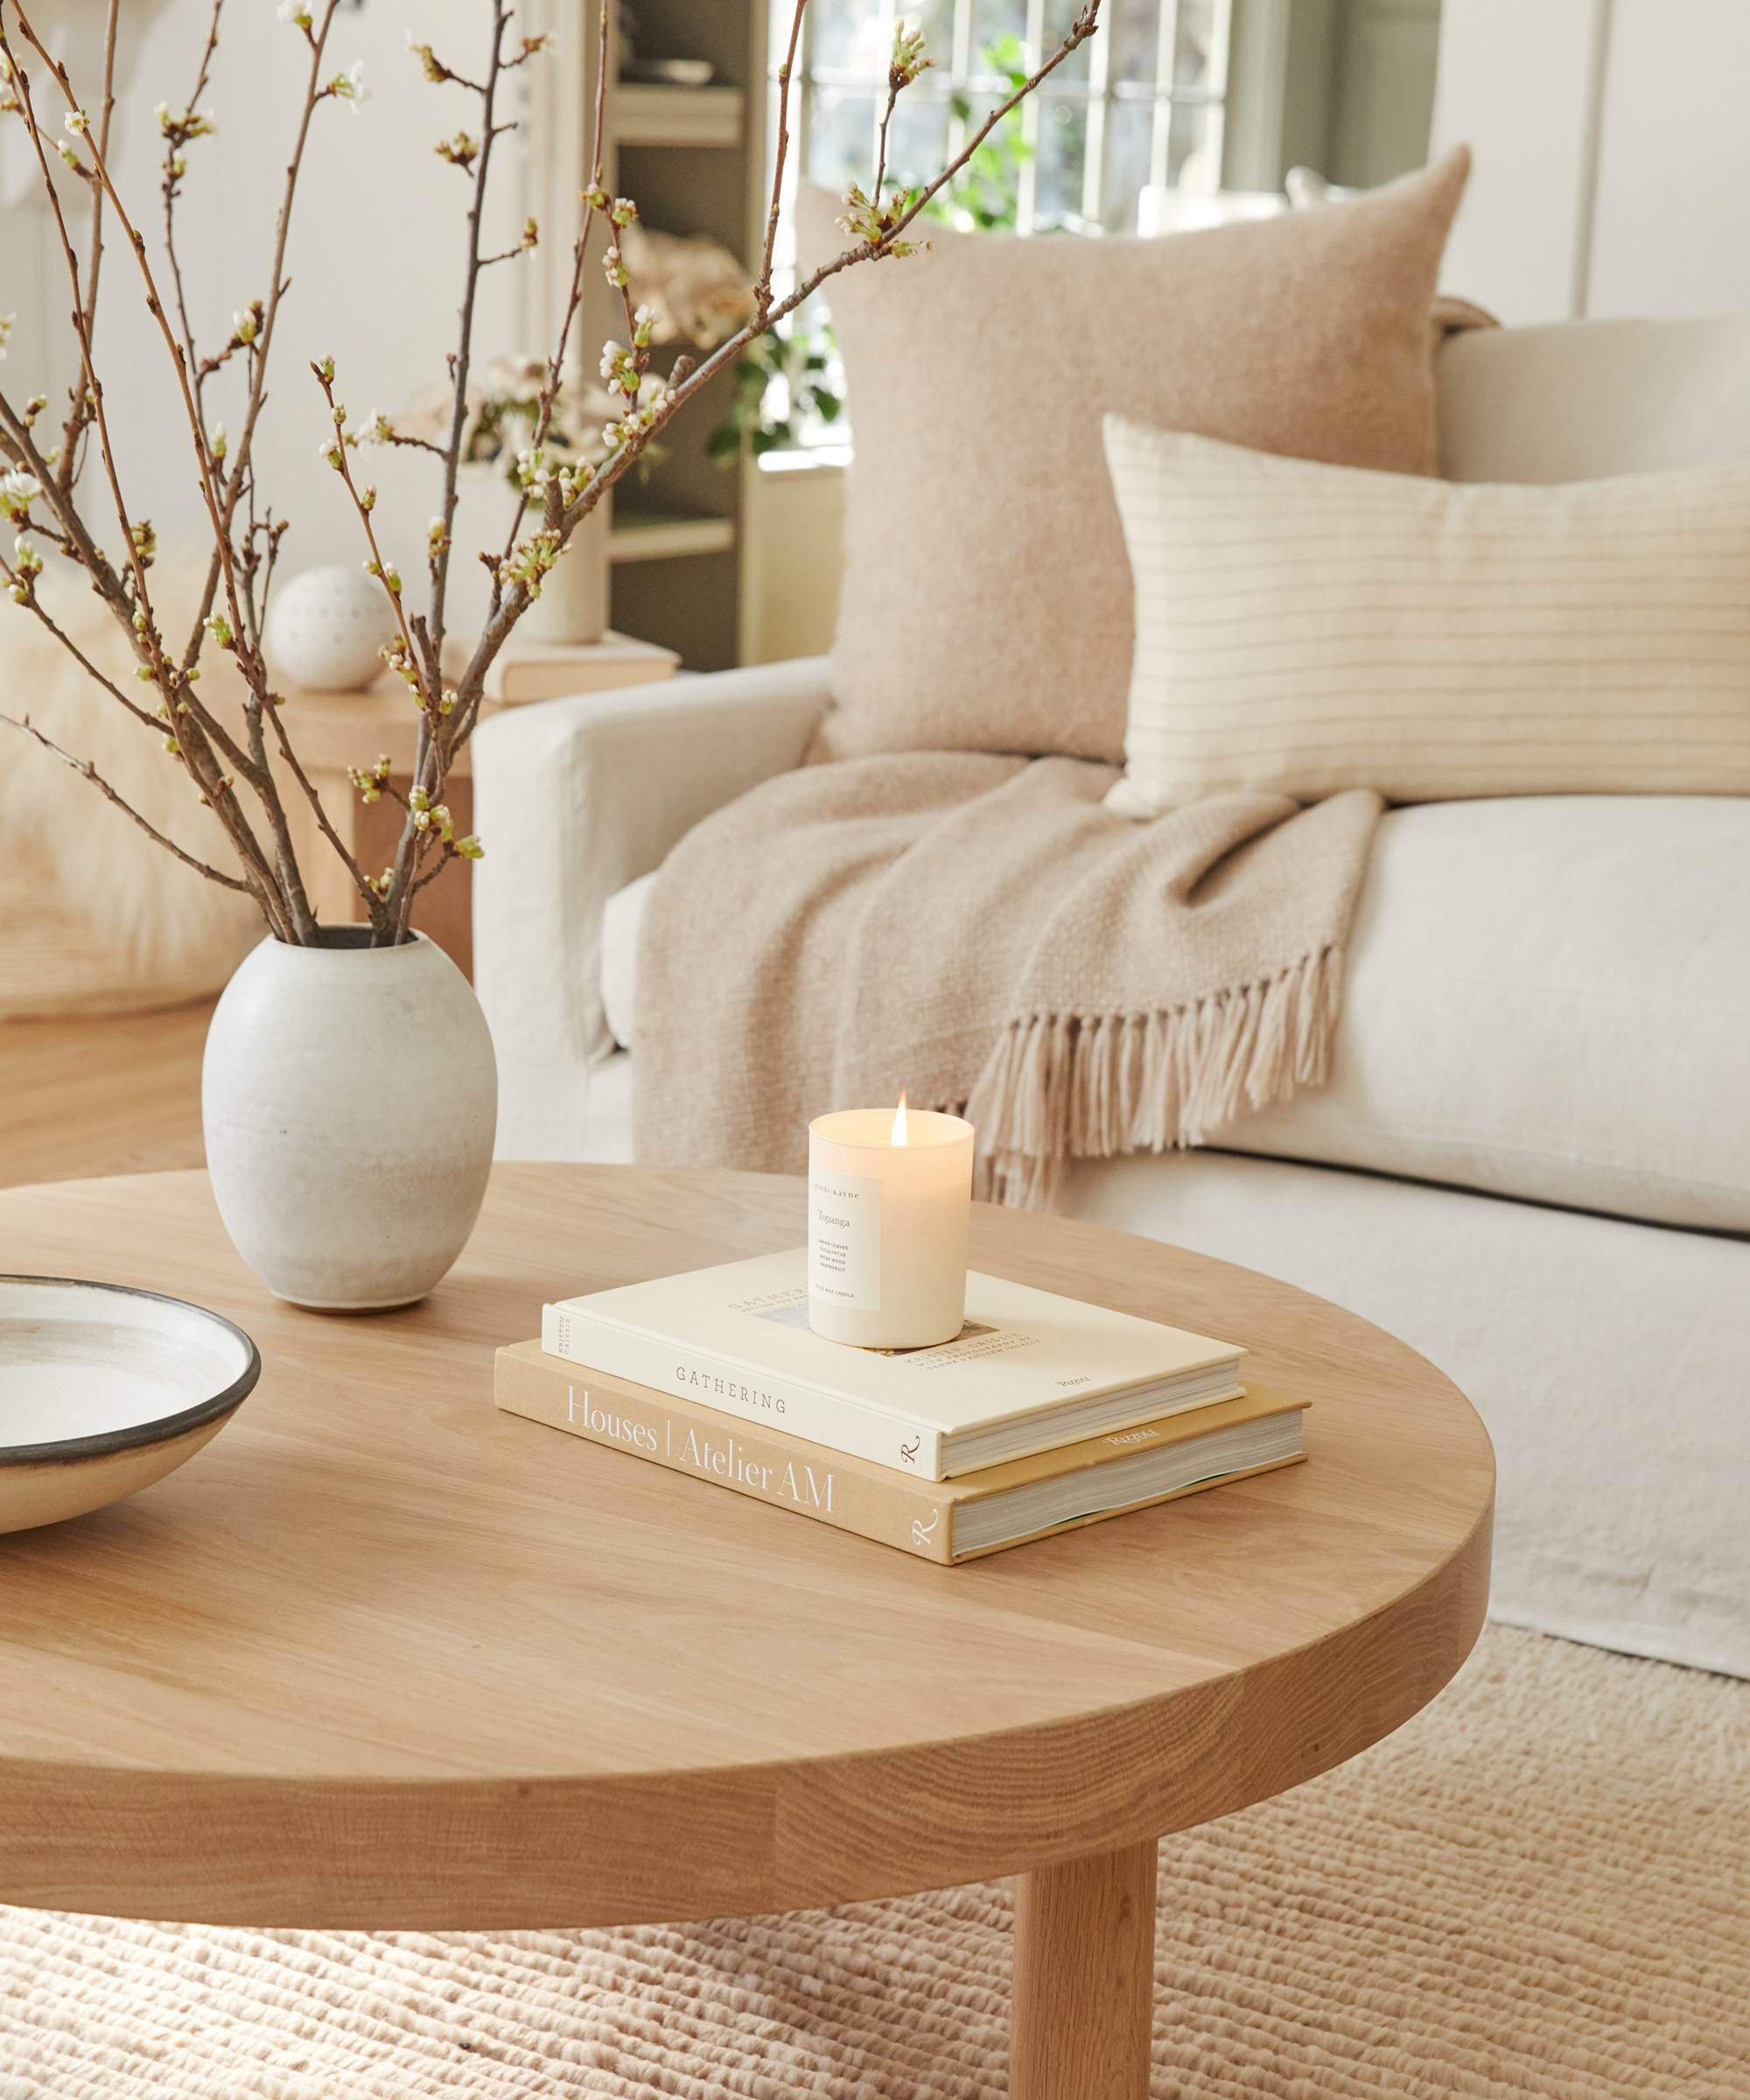 How to Style a Coffee Table, Interior Design Blog